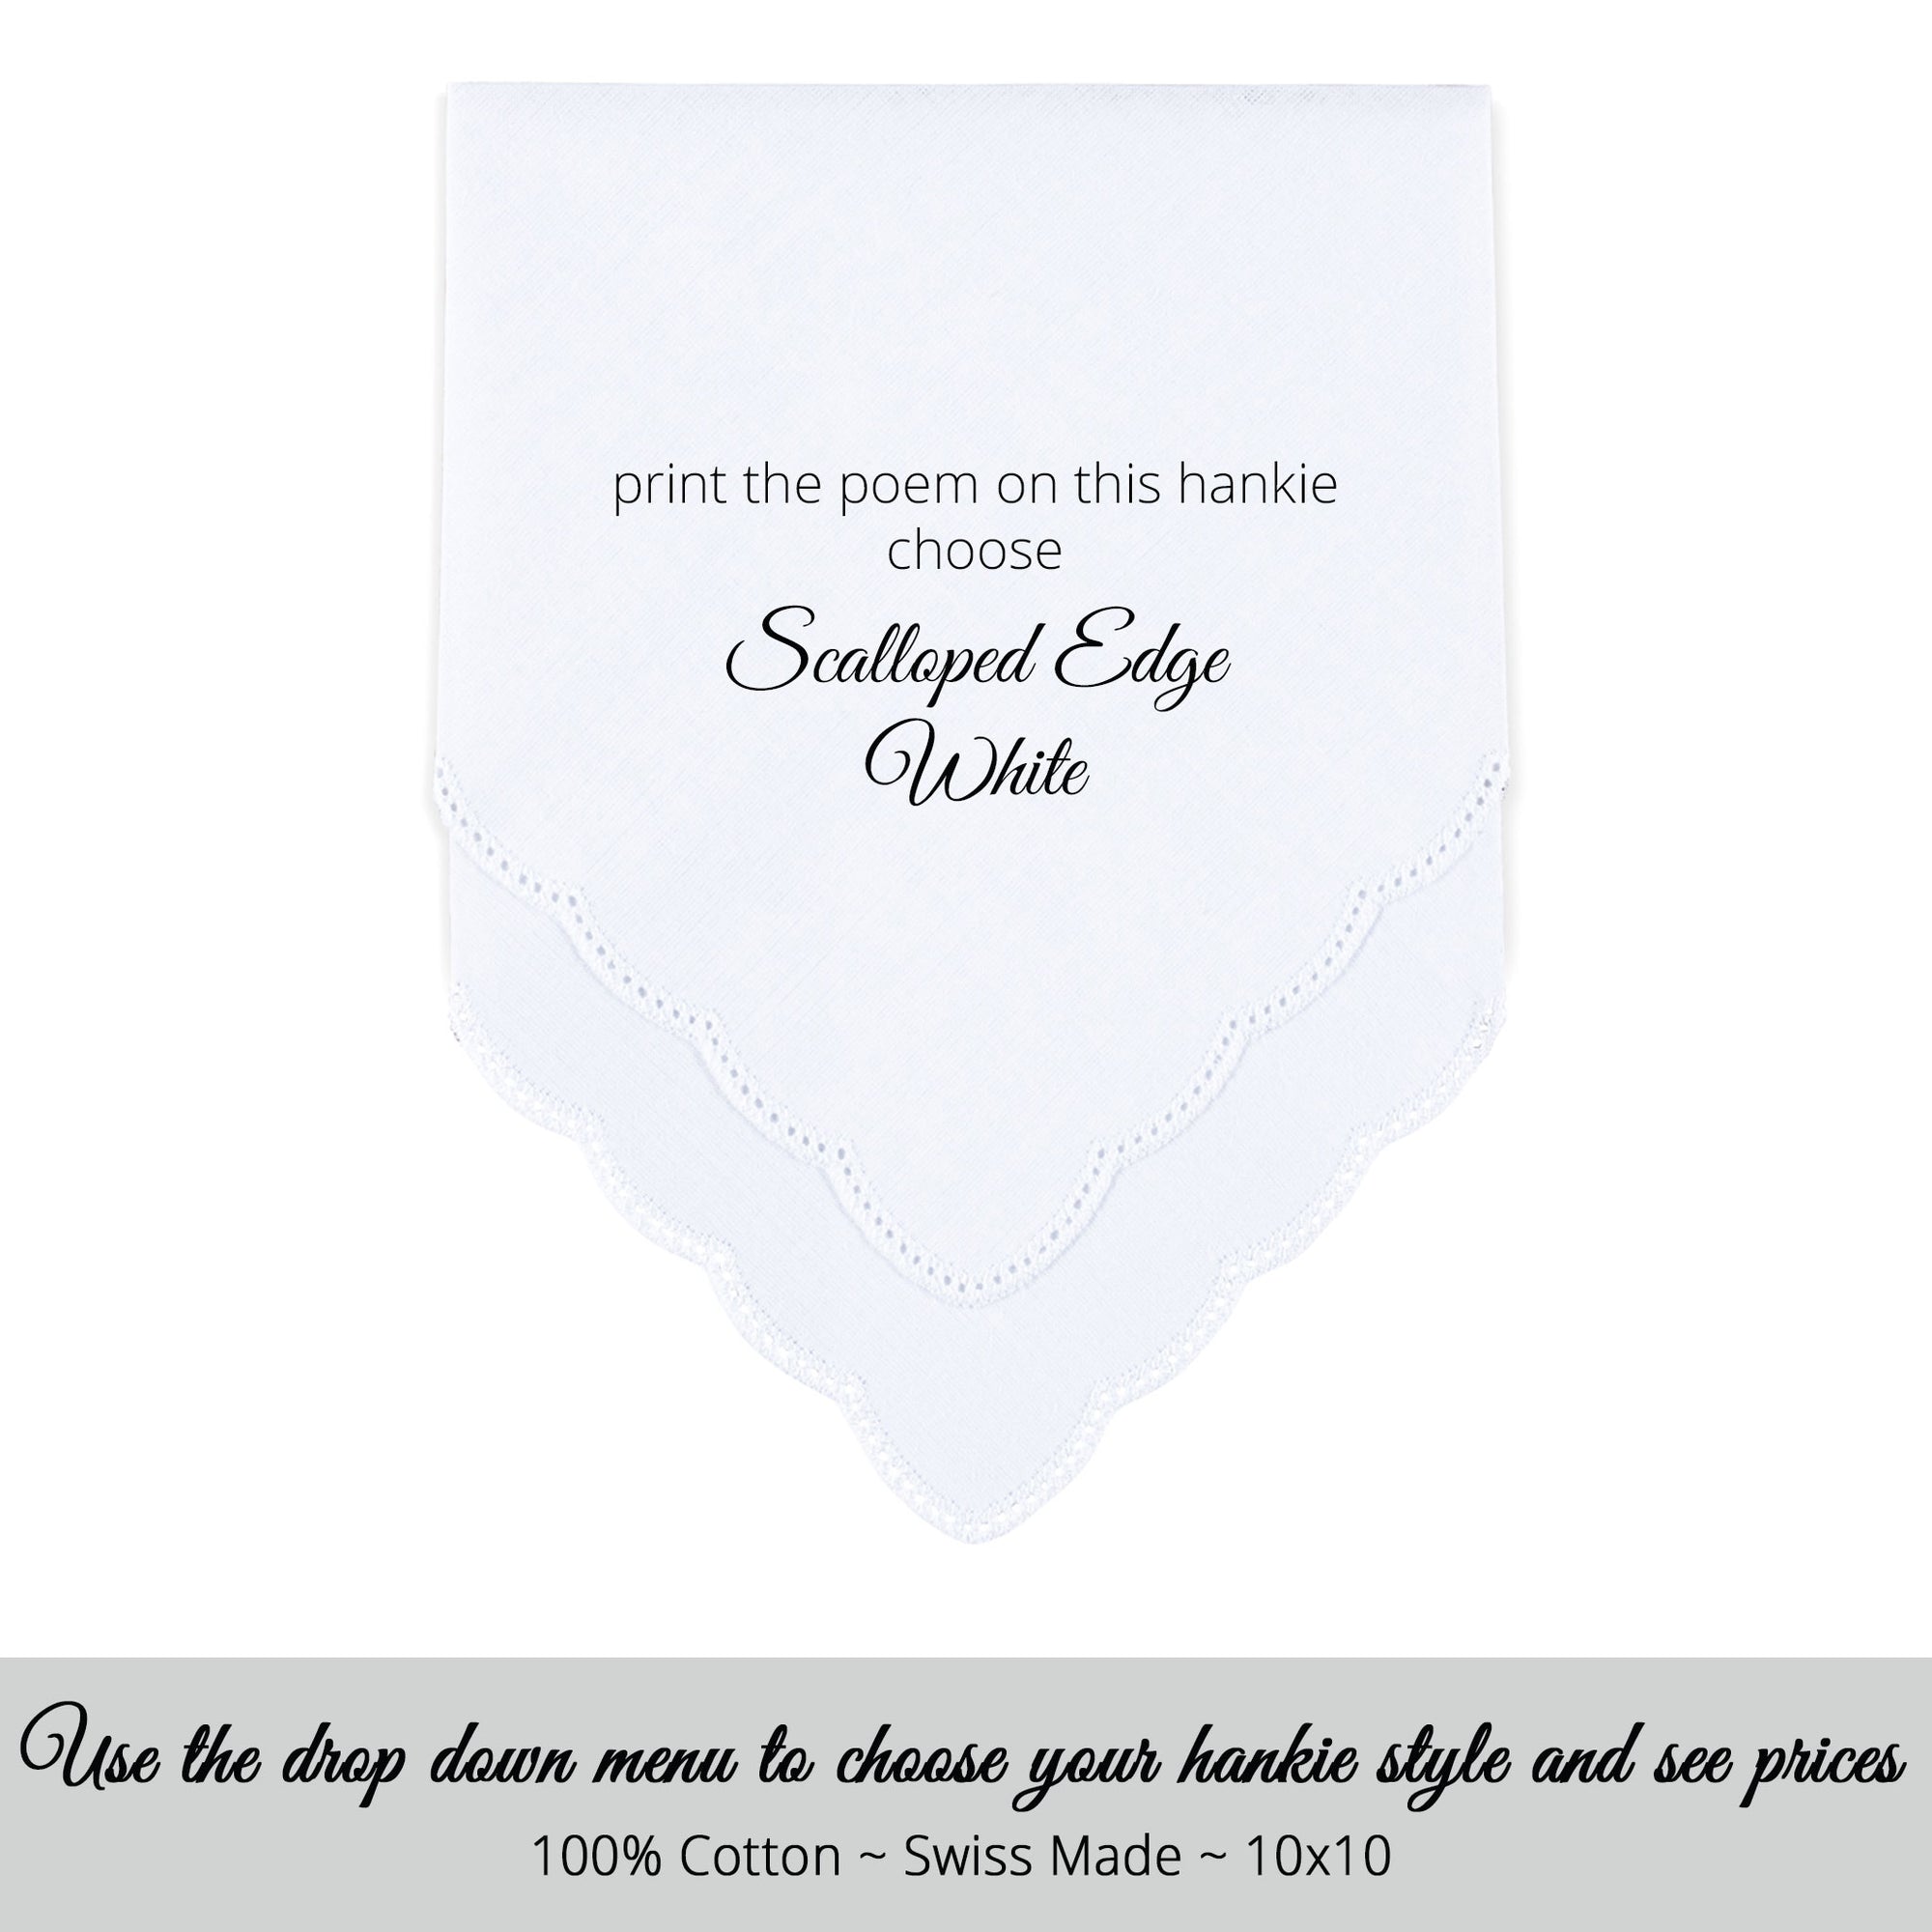 Poem Printed Gay Wedding Hankie from the Groom for someone who's Like a mother to him  "You're Like A Mother To Me"